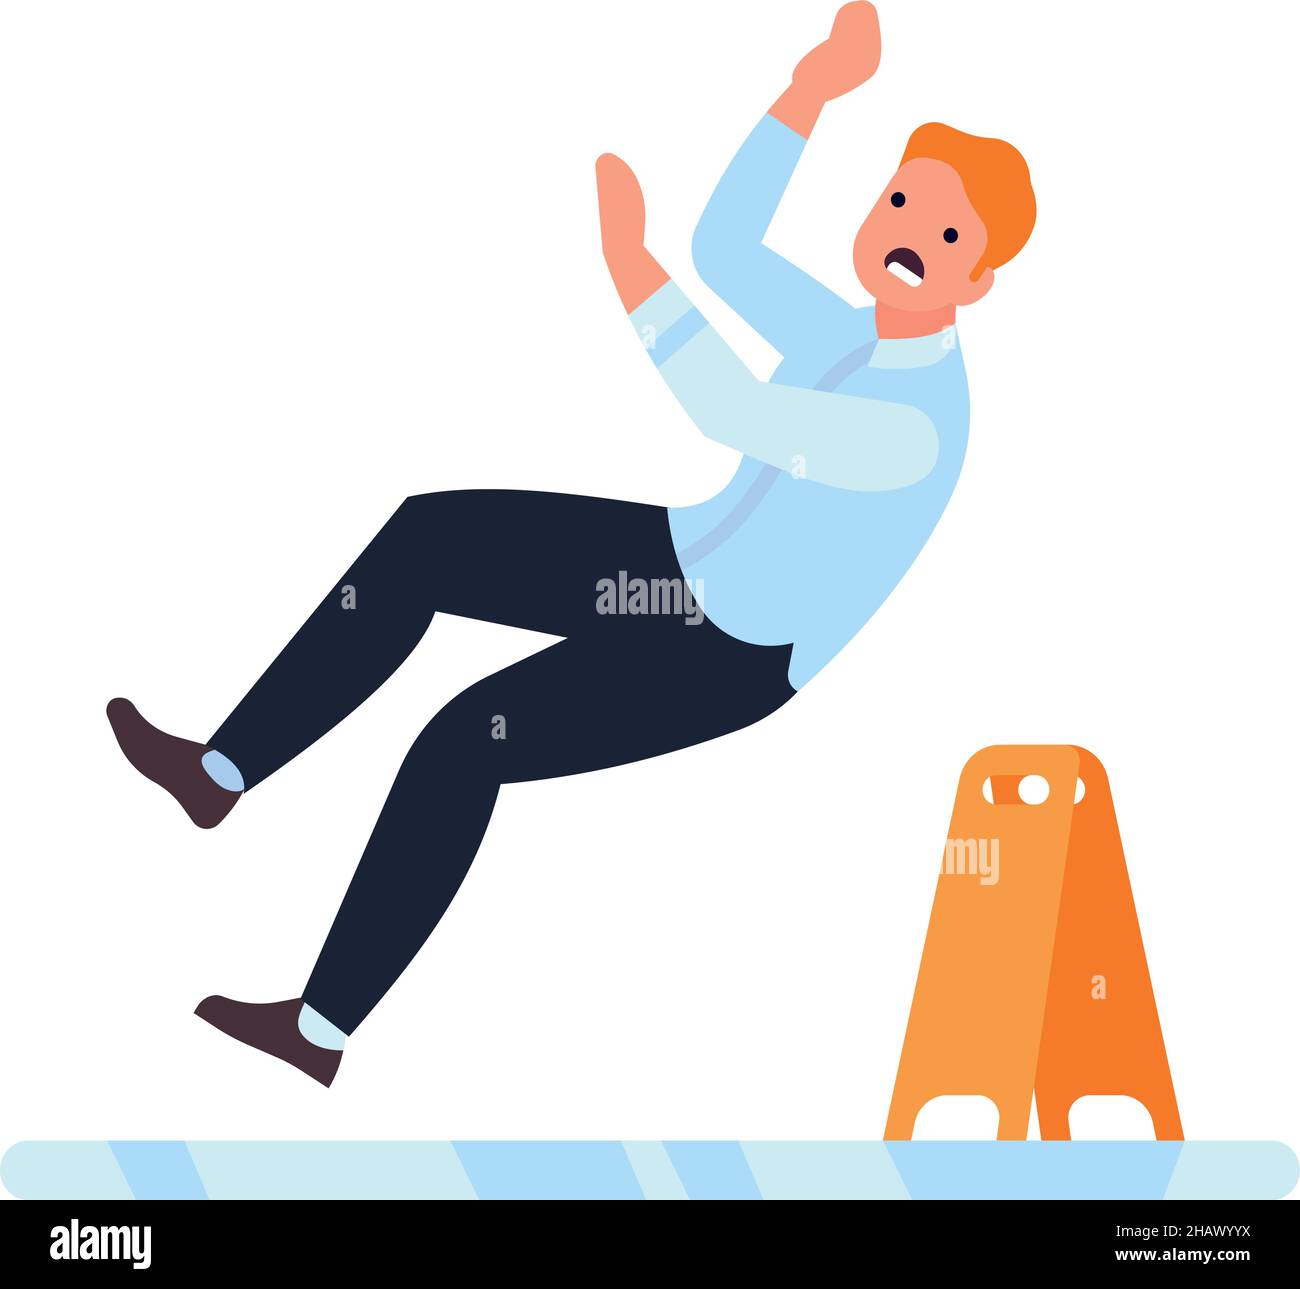 Slip and fall cartoon Cut Out Stock Images & Pictures - Alamy